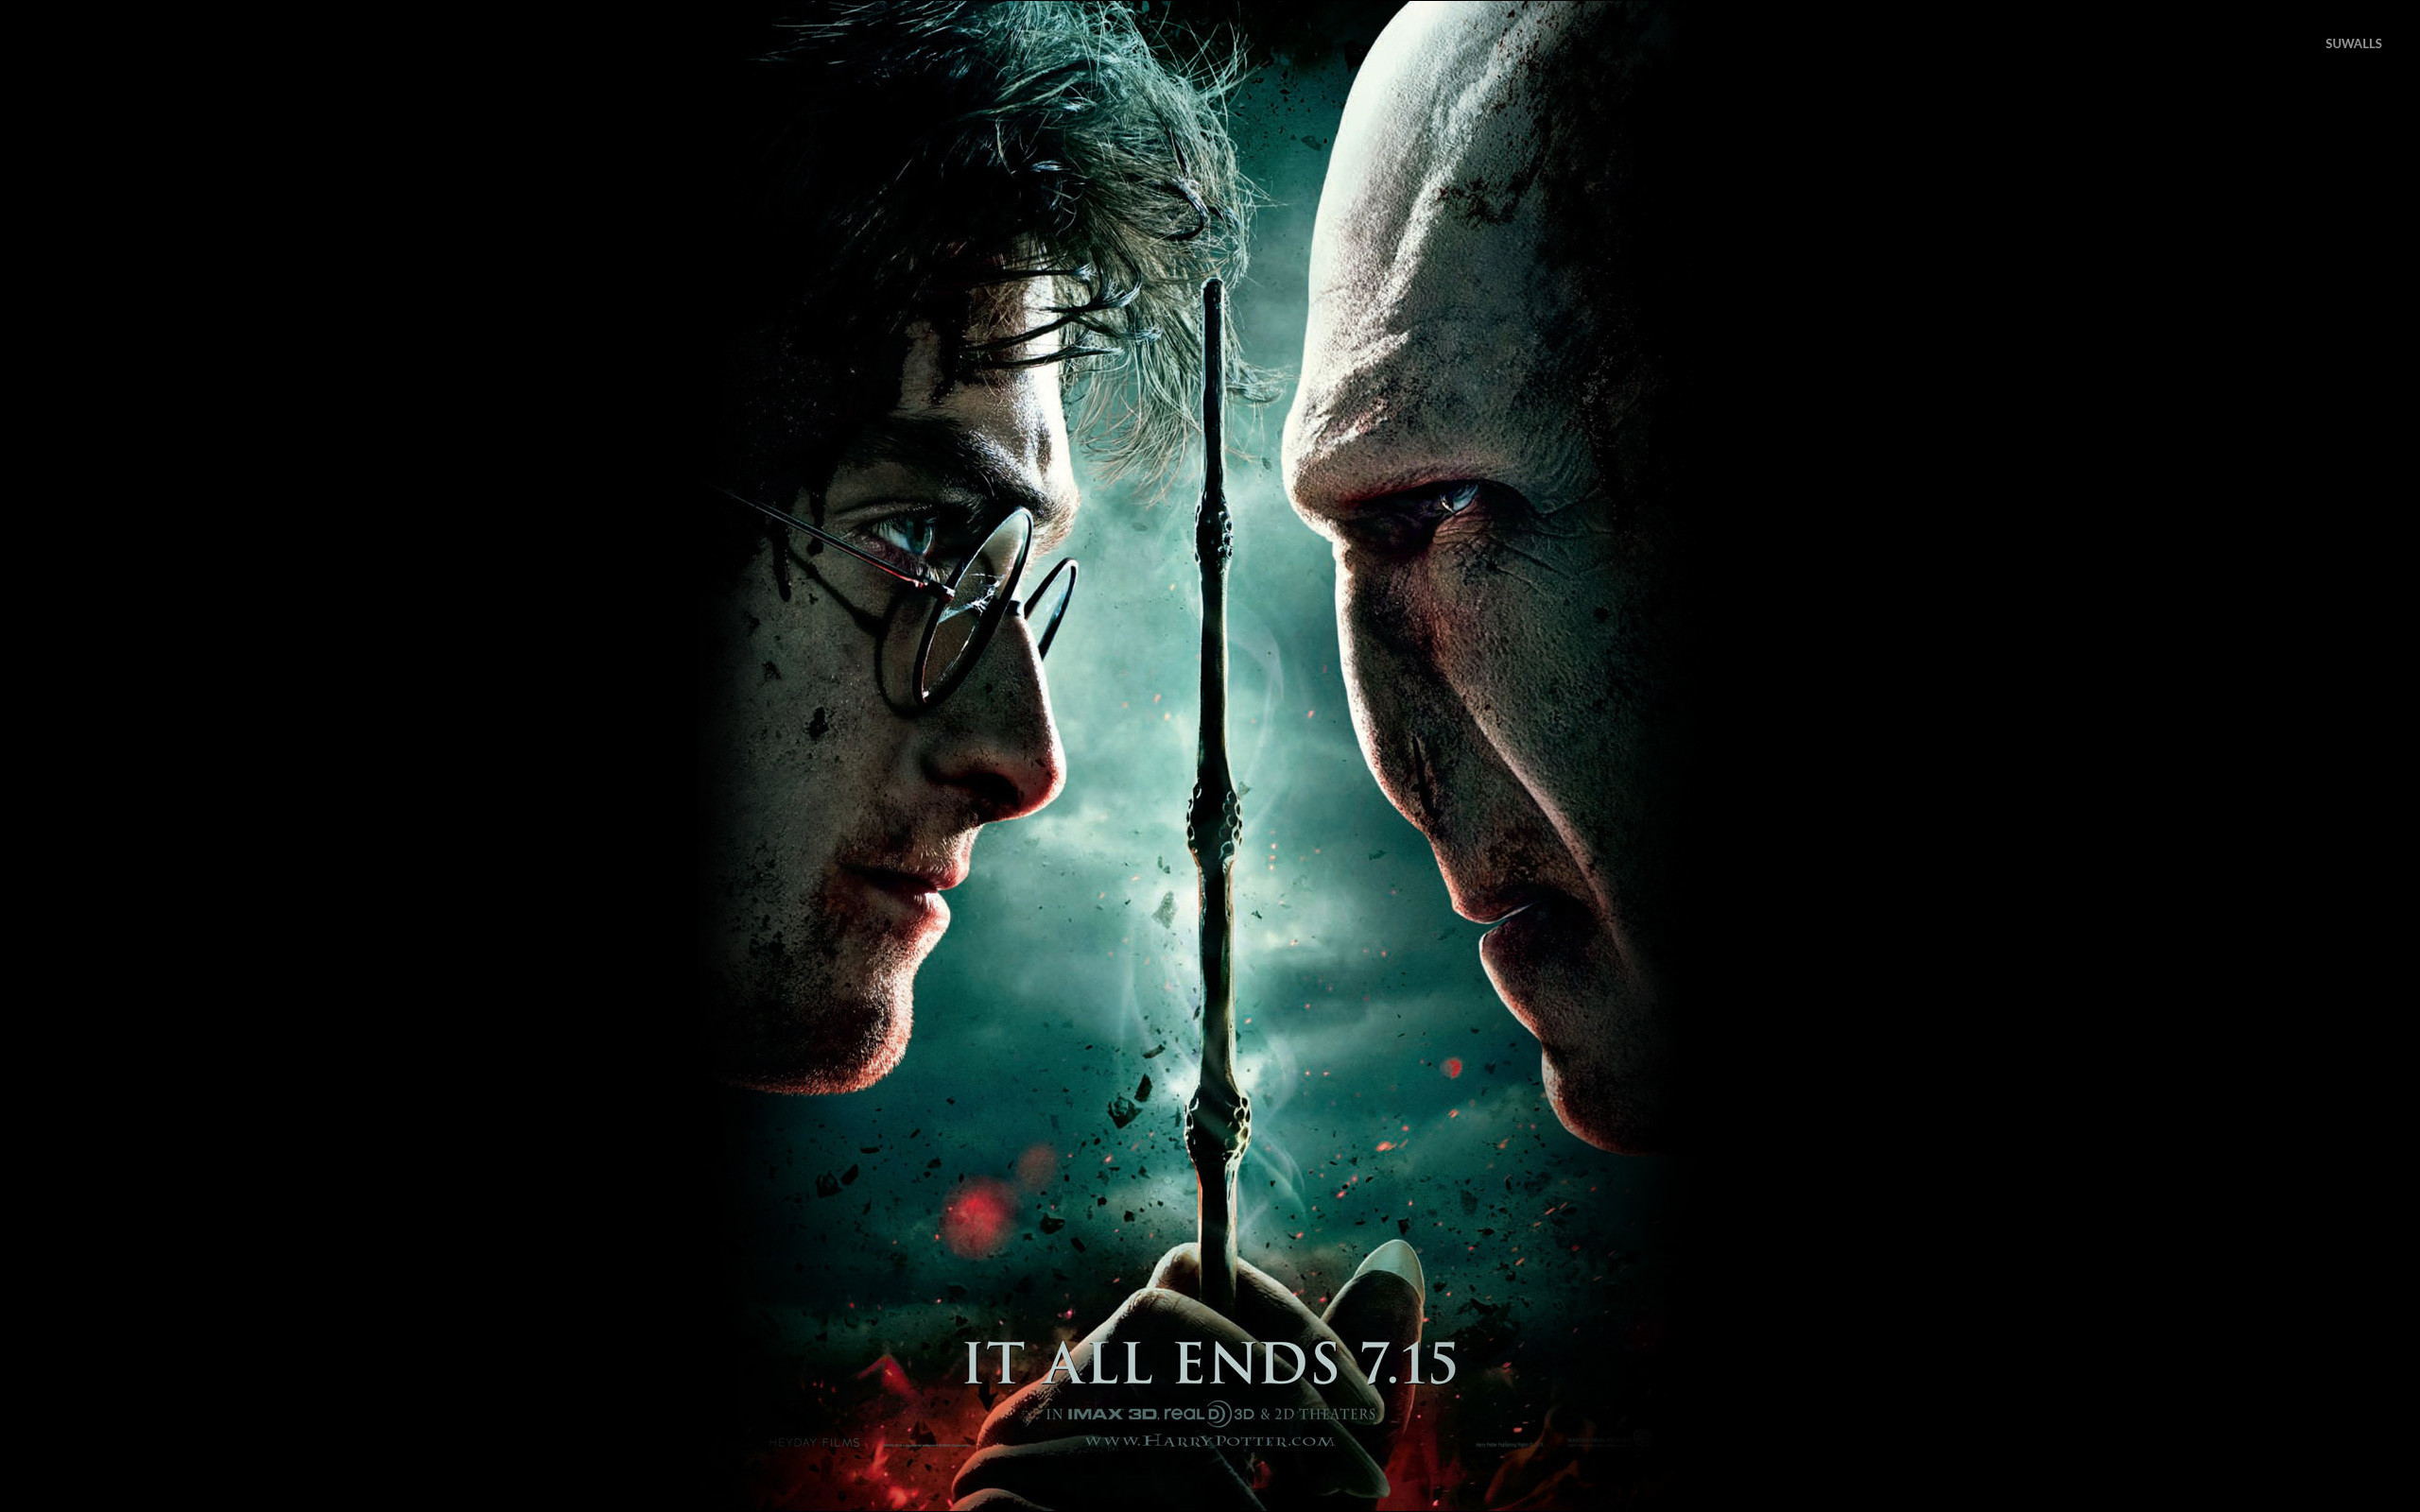 hd wallpapers of harry potter,movie,poster,darkness,human,fiction